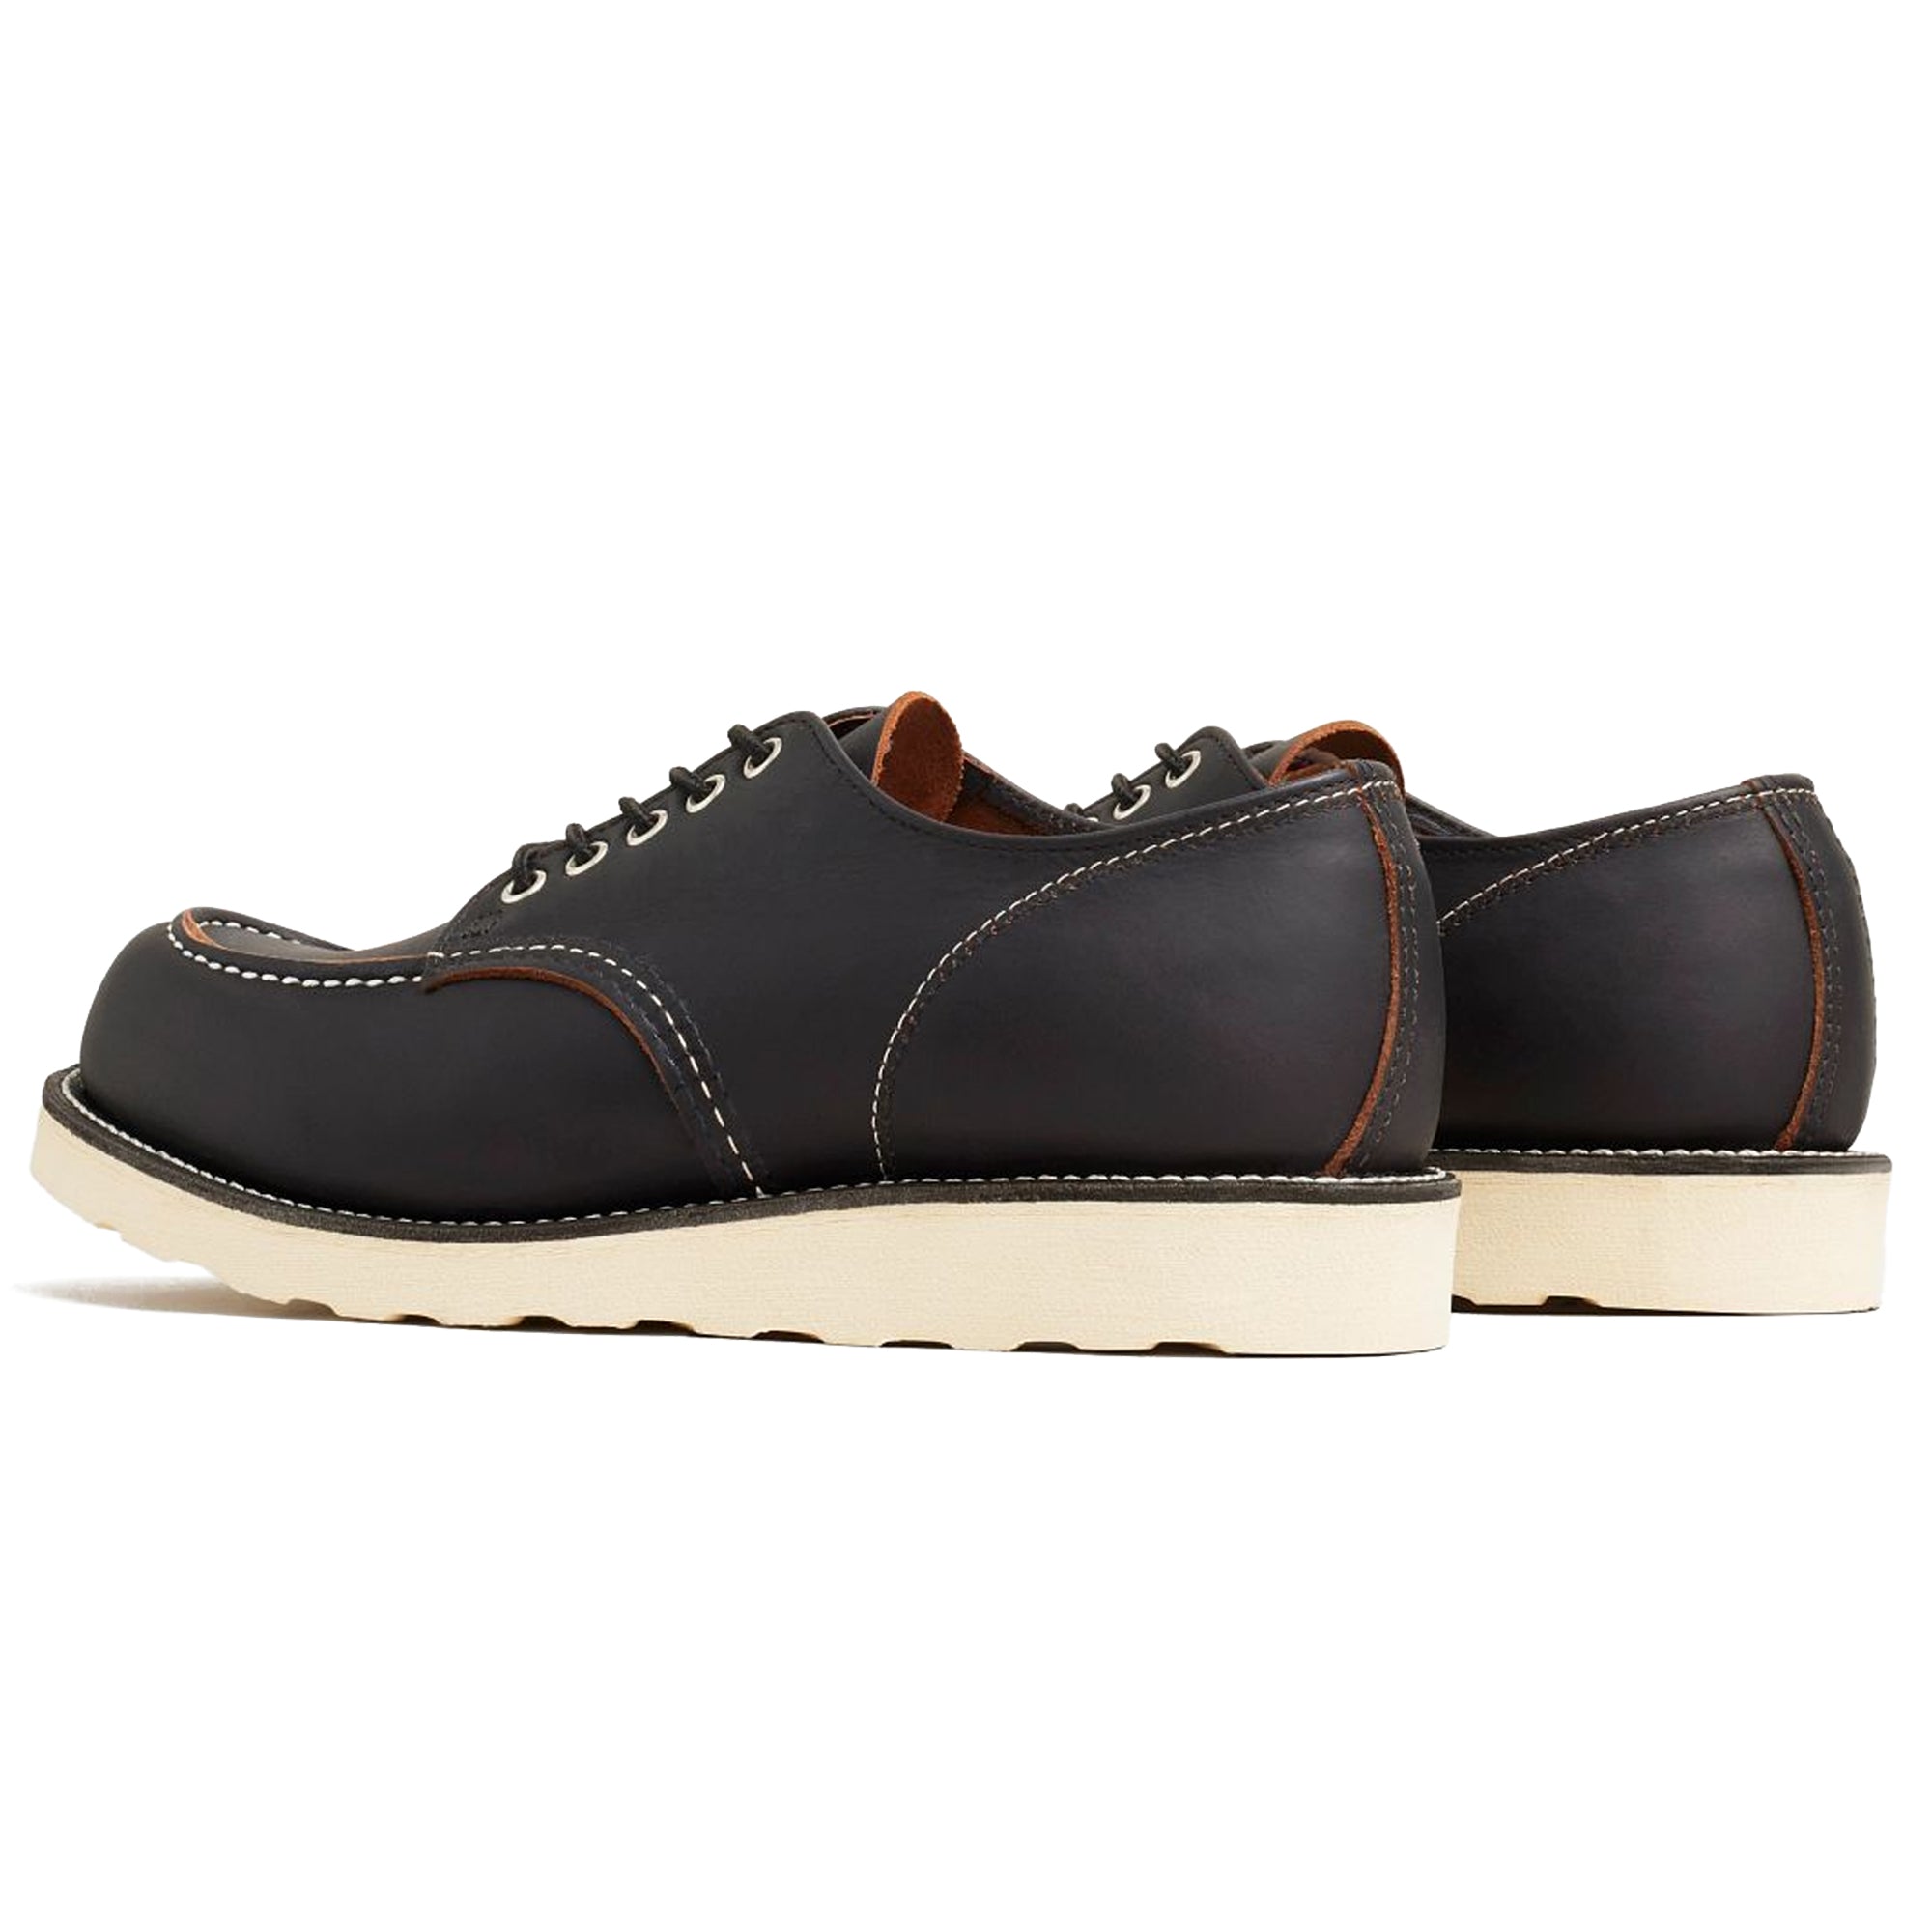 Red Wing 8090 Shop Moc Oxford Shoes – Black Prairie